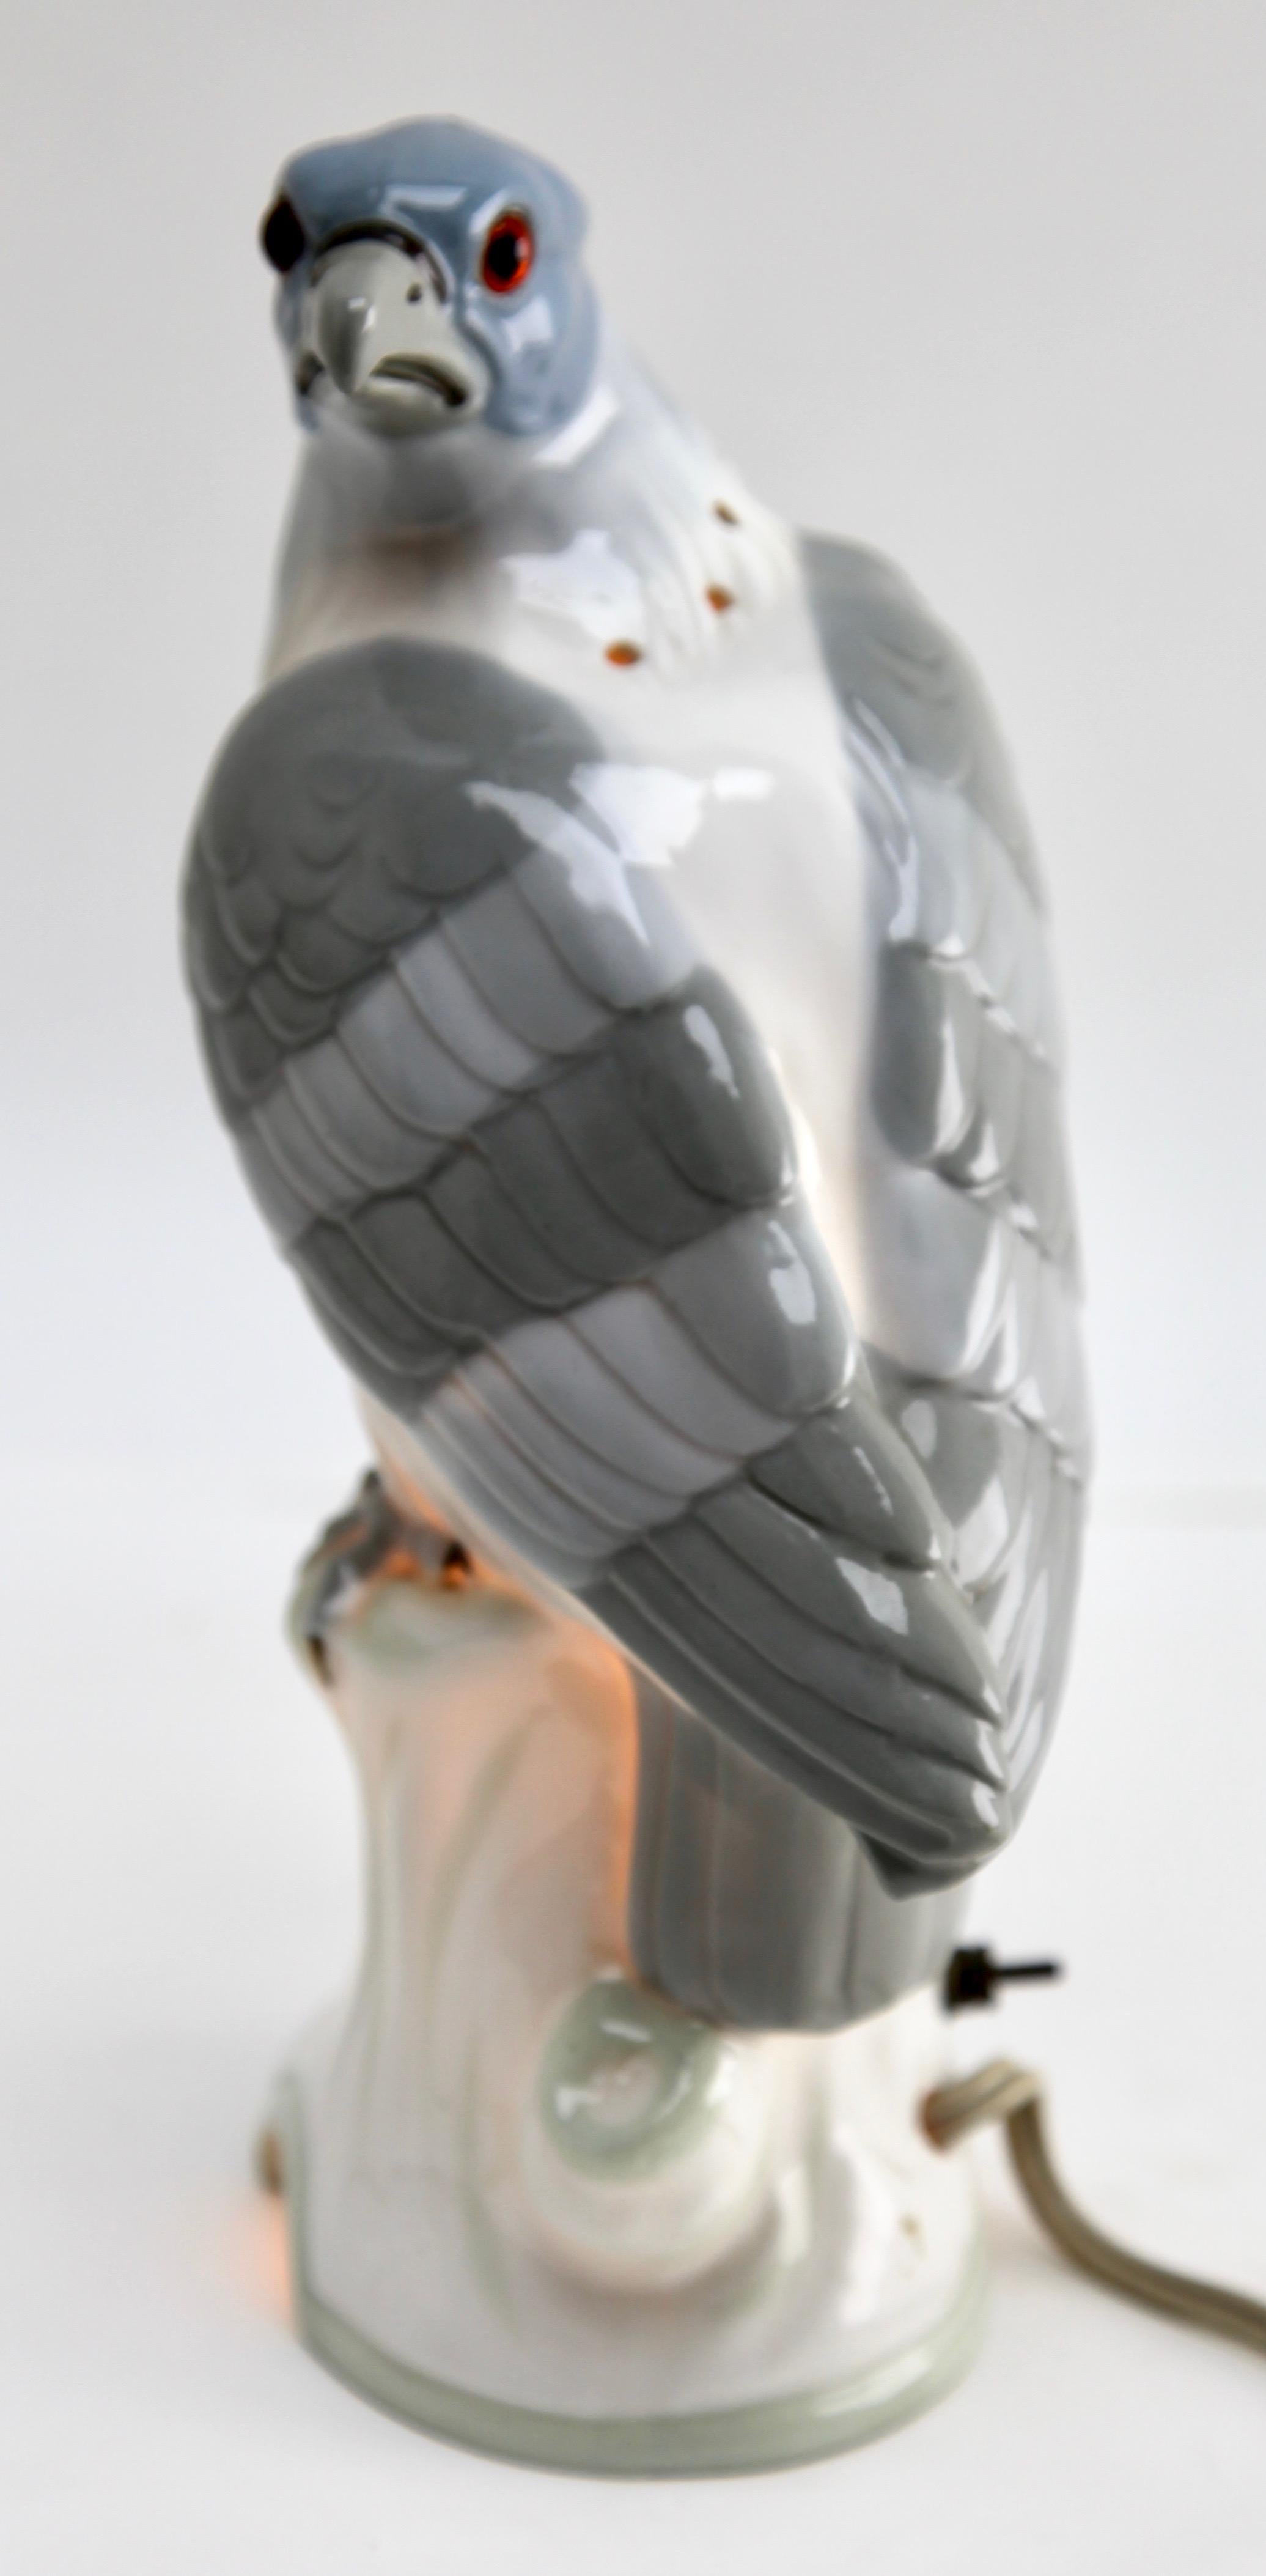 Rare and gorgeous eagle perfume lamp attributed to Carl Scheidig Grafenthal, Germany.
Excellent condition, lamp is in working order.
Size: Height 23 cm, 9.05 inches, width 14 cm, 5.51 inches.
Germany, 1930s, excellent condition
Porcelain